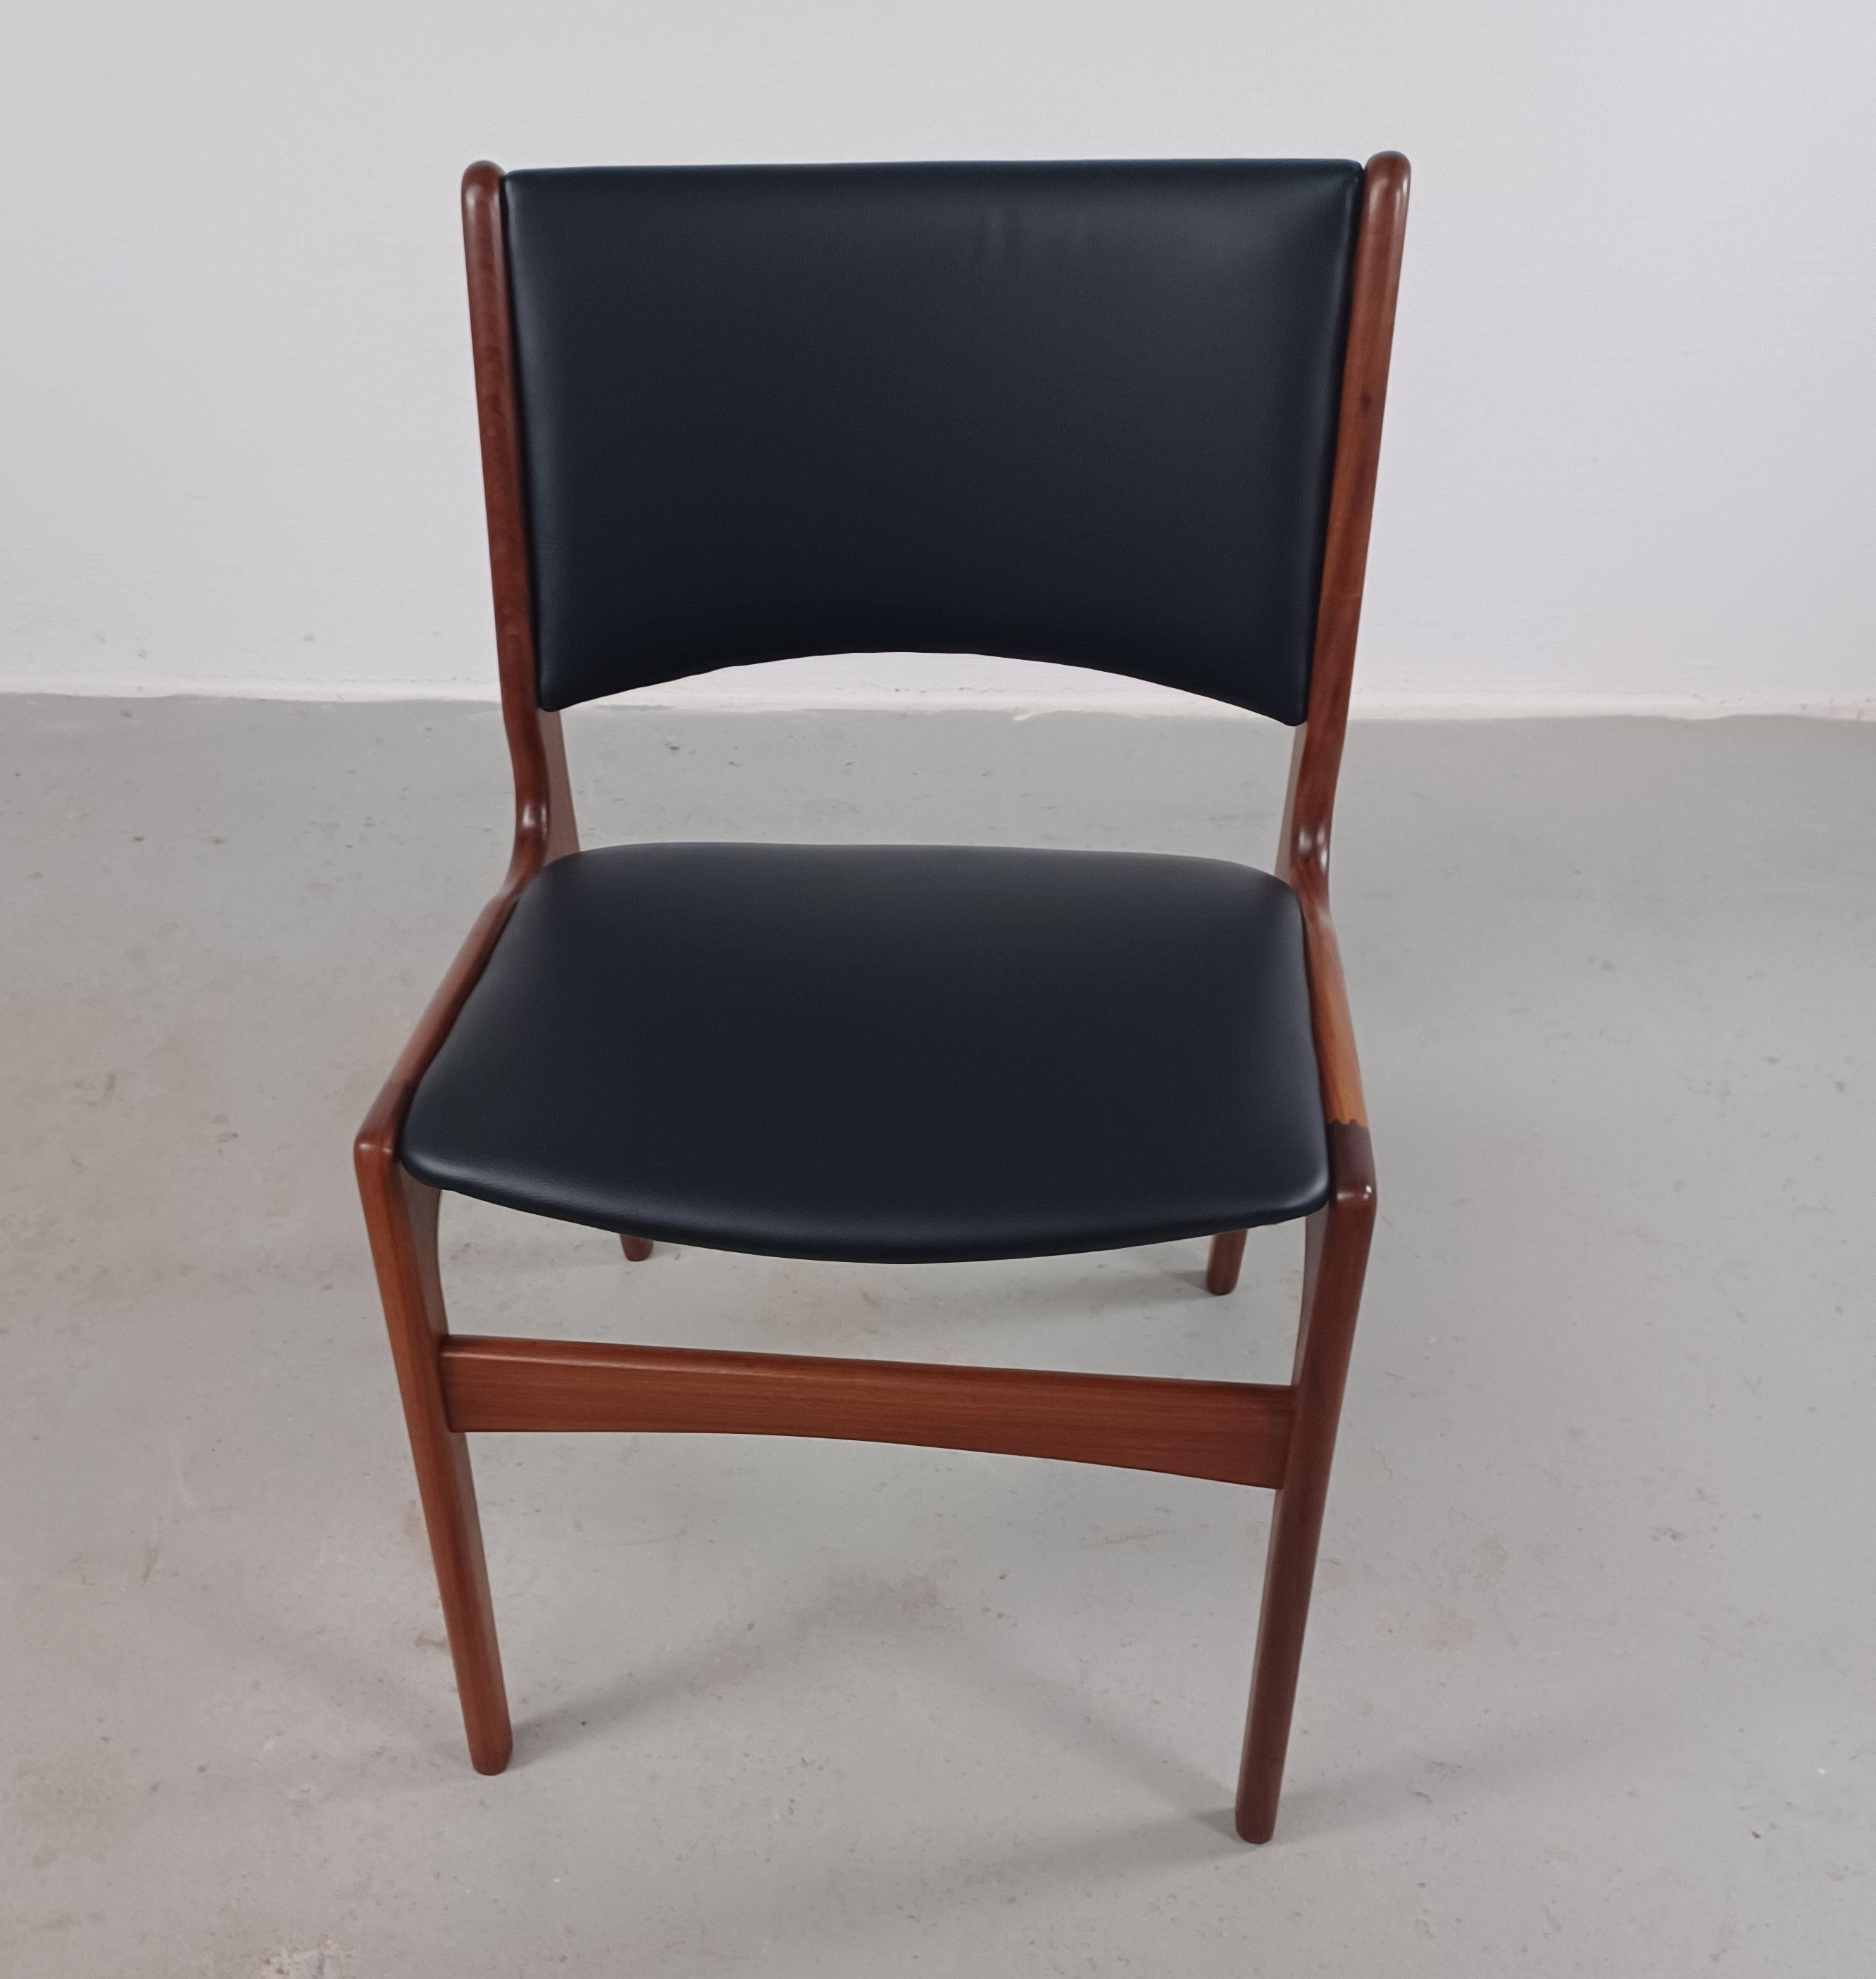 Set of four Danish fully restored Erik Buch dining chairs made by Anderstrup Møbelfabrik.

The chairs are made in teak and feature a solid wooden frame and are as all of Erik Buchs chairs characterized by top quality materials, solid craftsmanship,